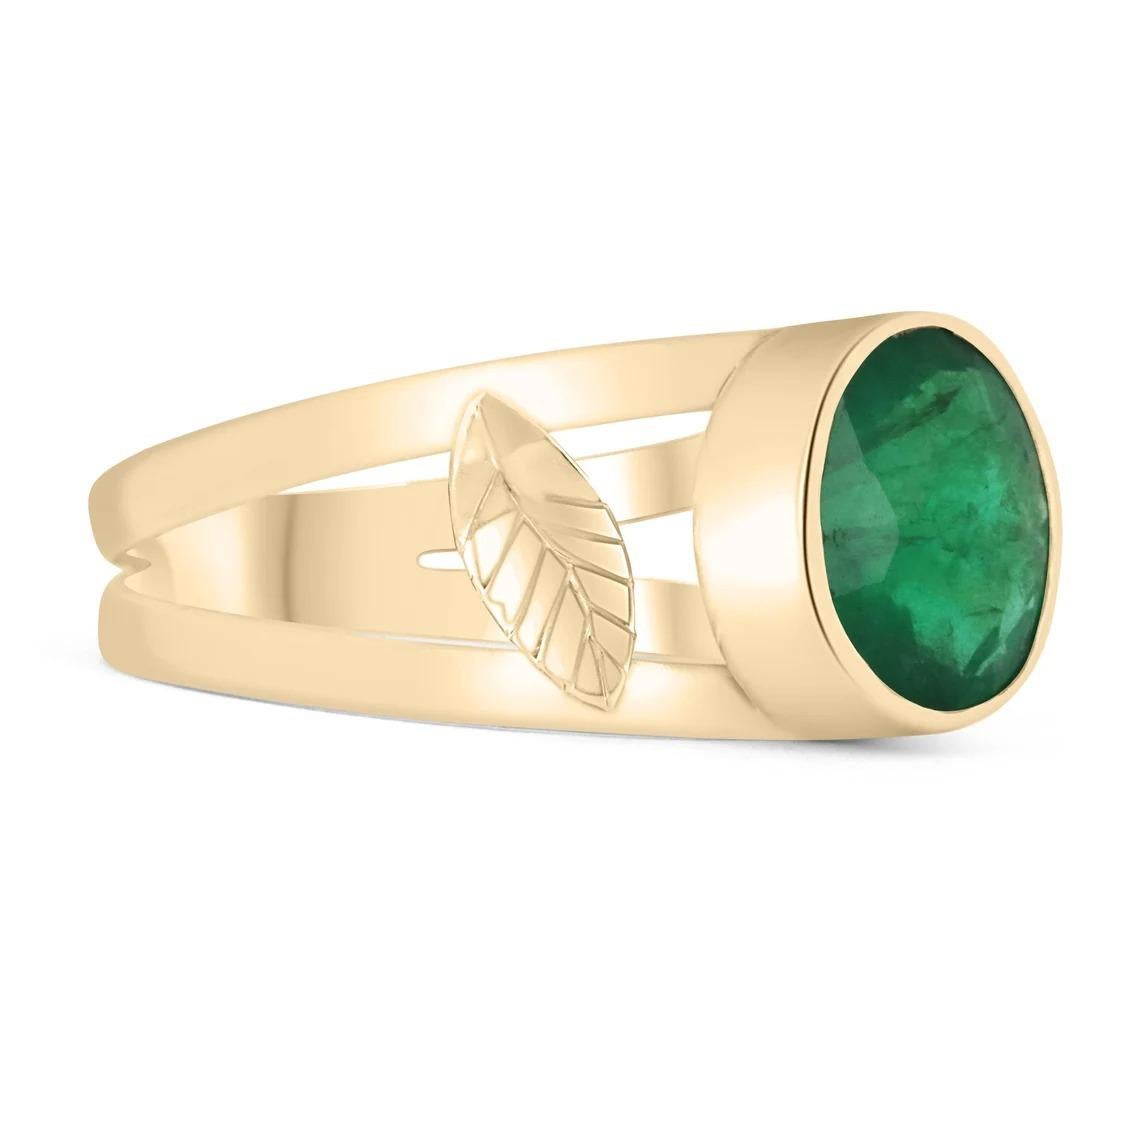 Displayed is a stunning natural emerald, oval-cut gold ring. This custom piece is extremely unique, with it's vintage detail along the shank. This natural oval-cut emerald showcases gorgeous dark green color and good luster. The stone is set